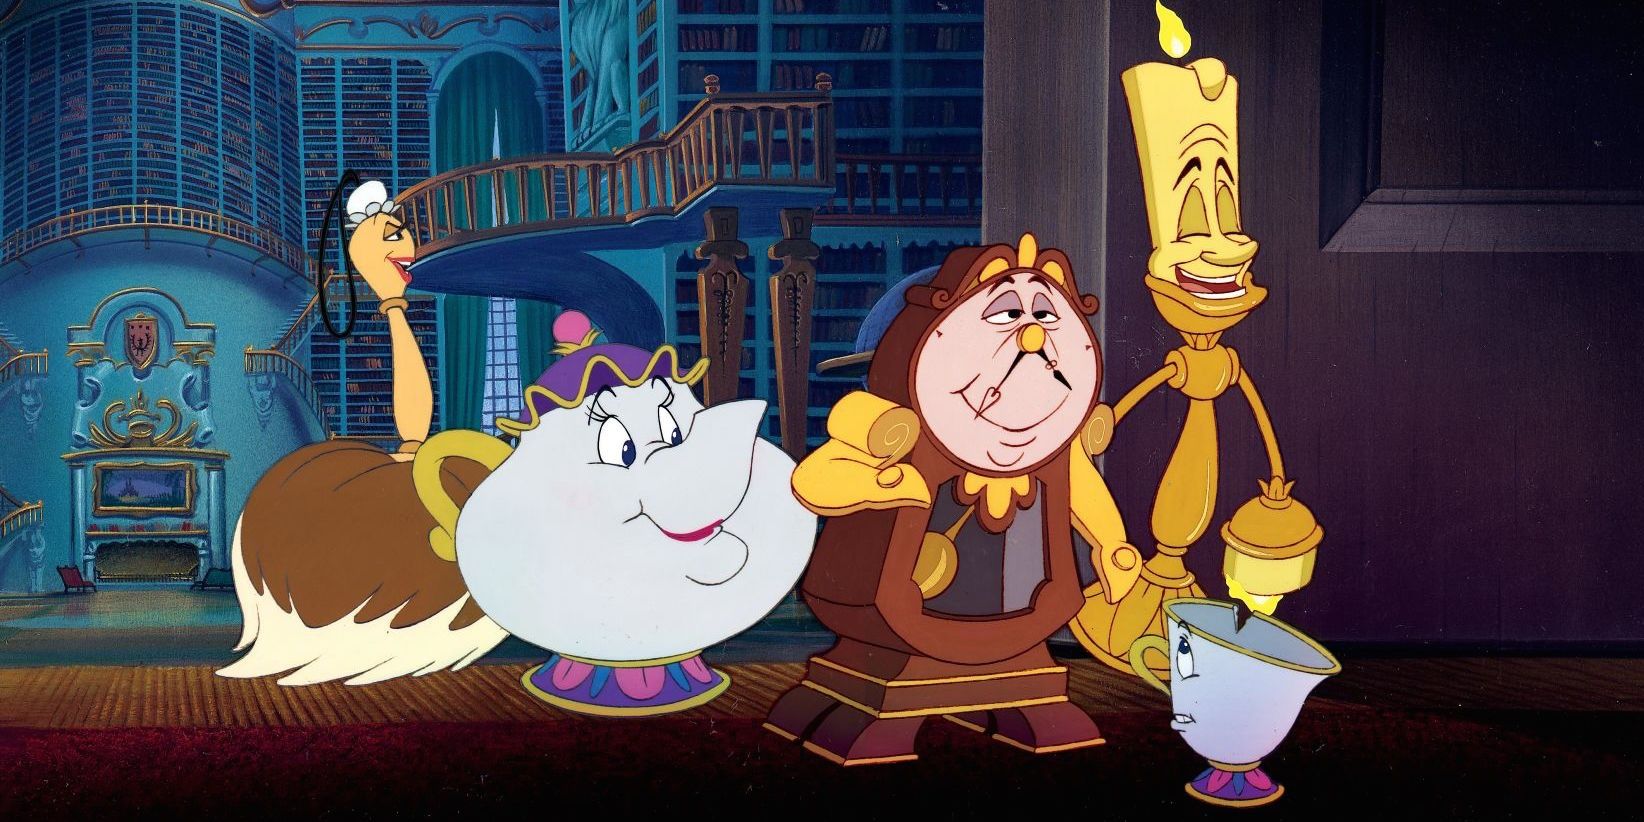 Cogsworth, Mrs. Potts, Lumiere, and Chip smiling together